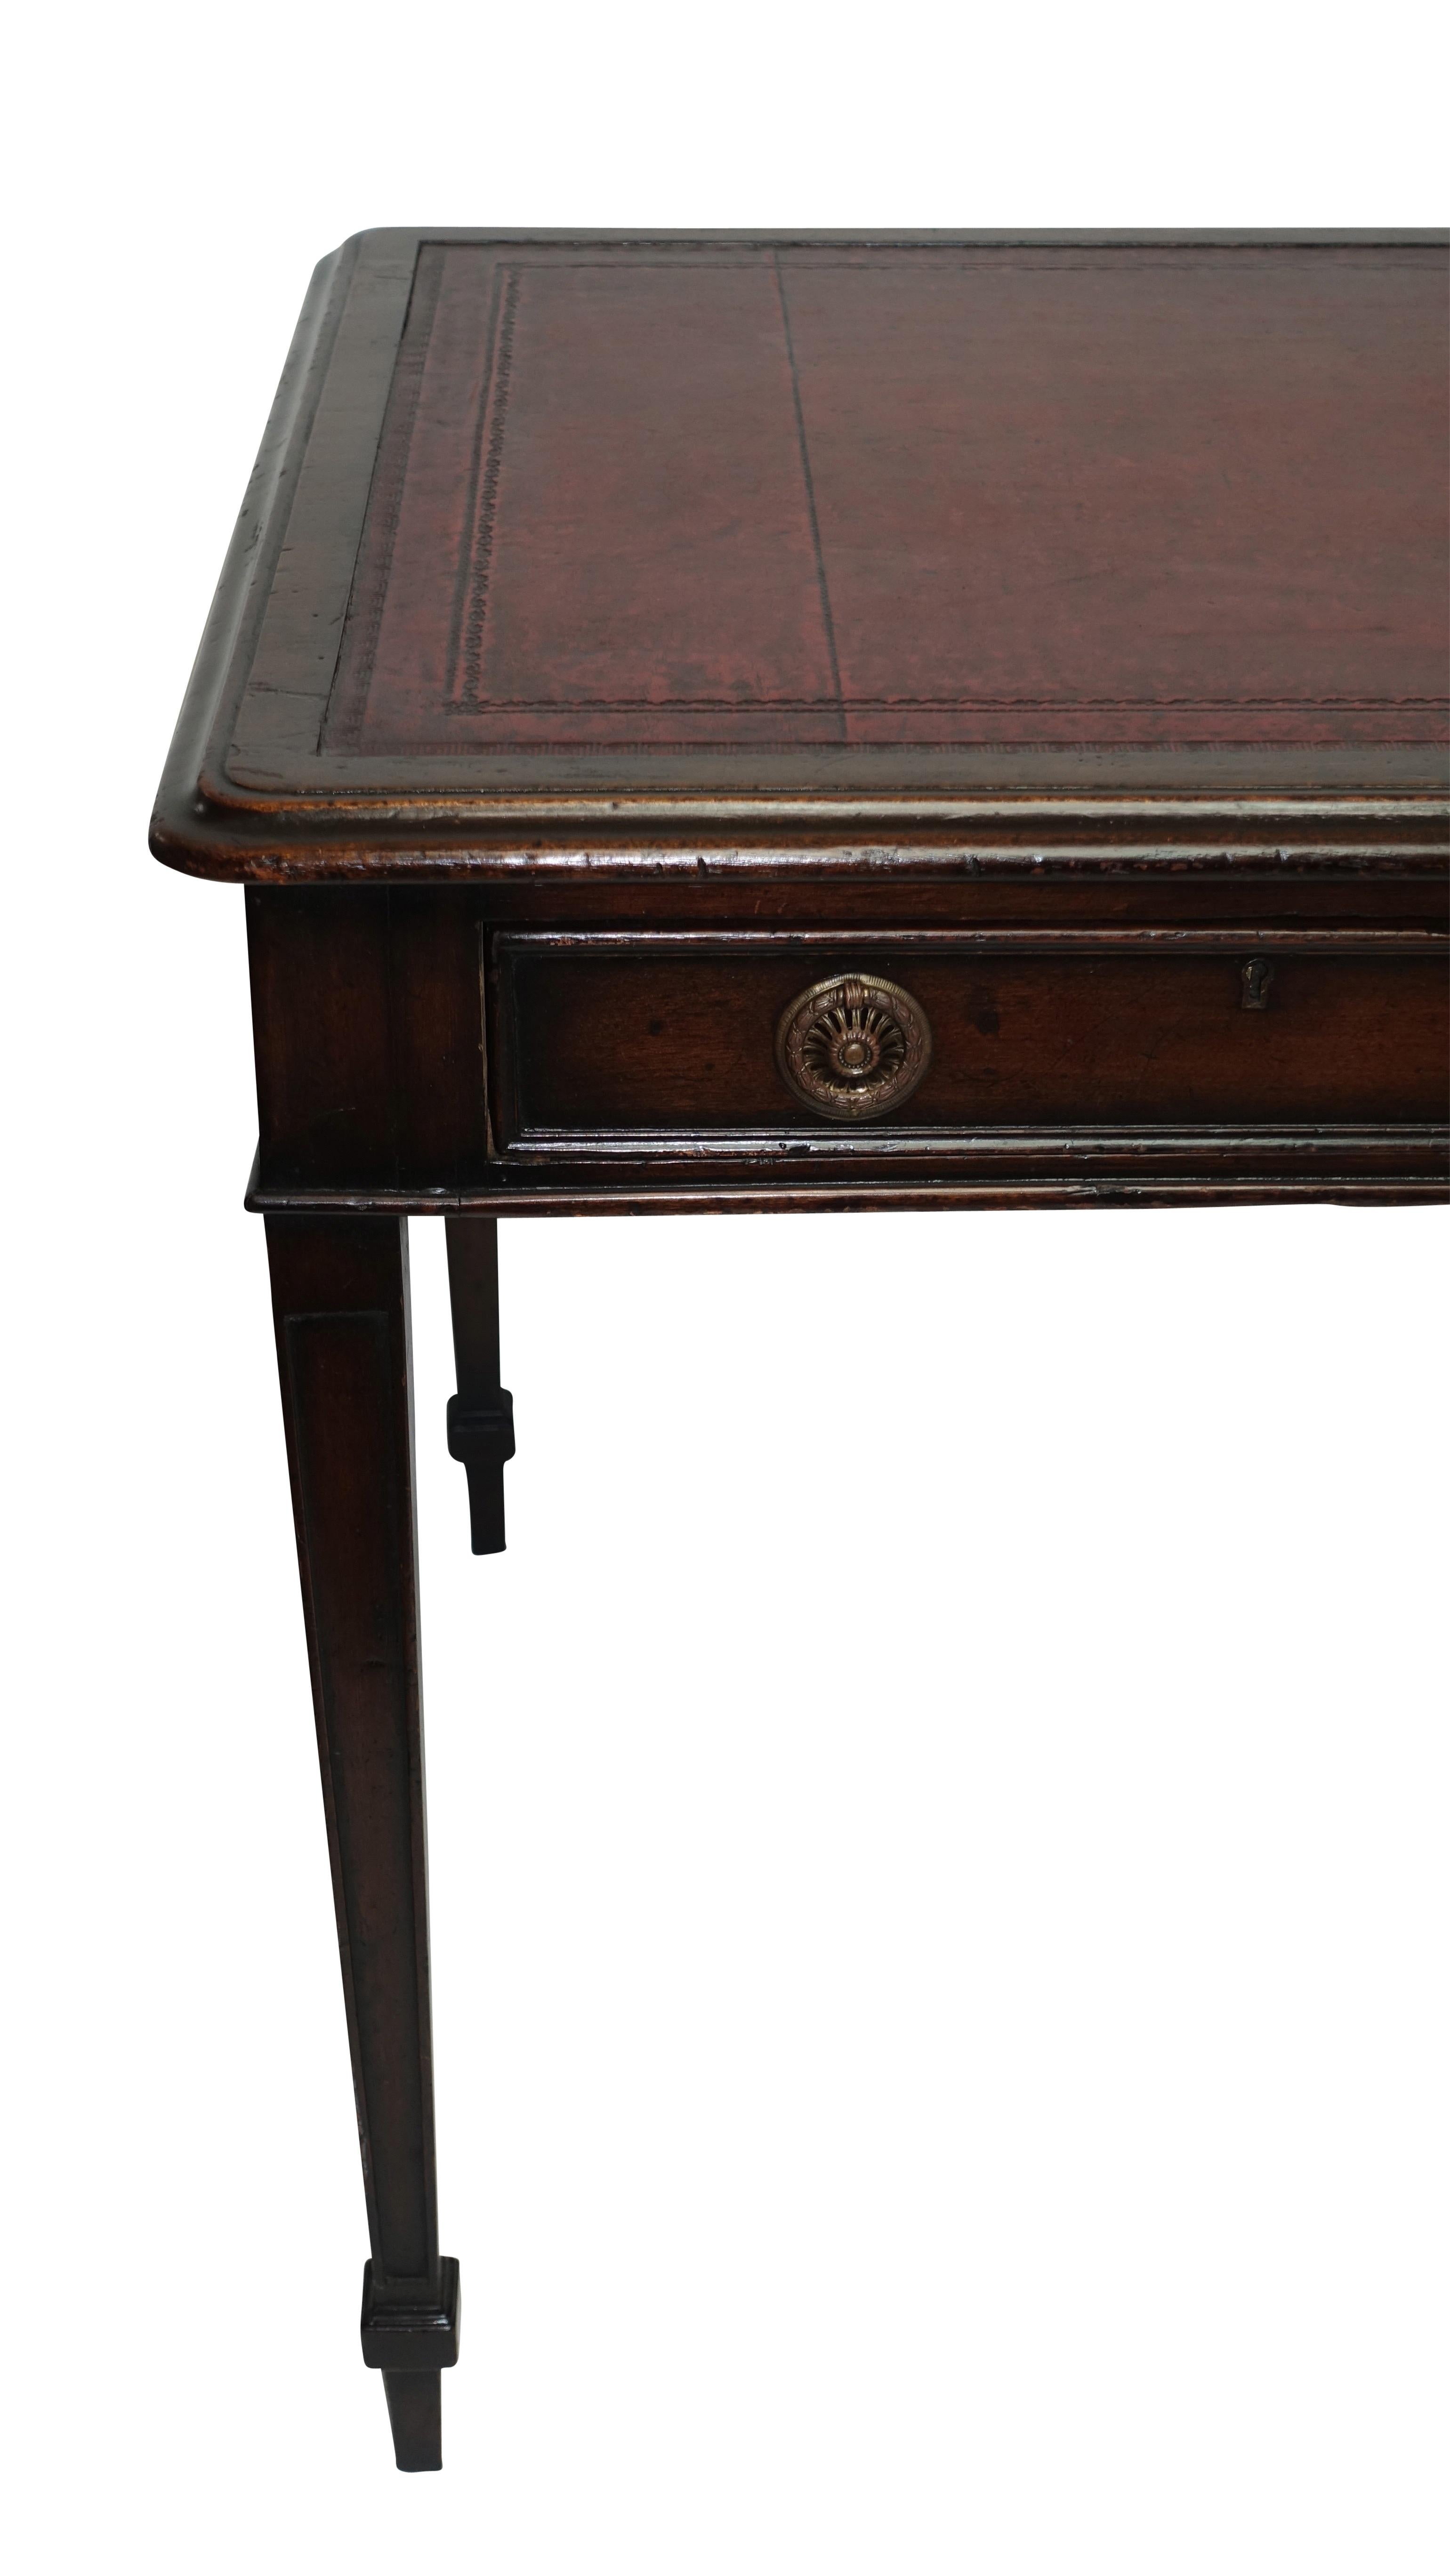 Mahogany writing table desk with inset embossed red leather top above two drawers standing on square tapering legs with cuffed foot. England, early to mid-19th century.